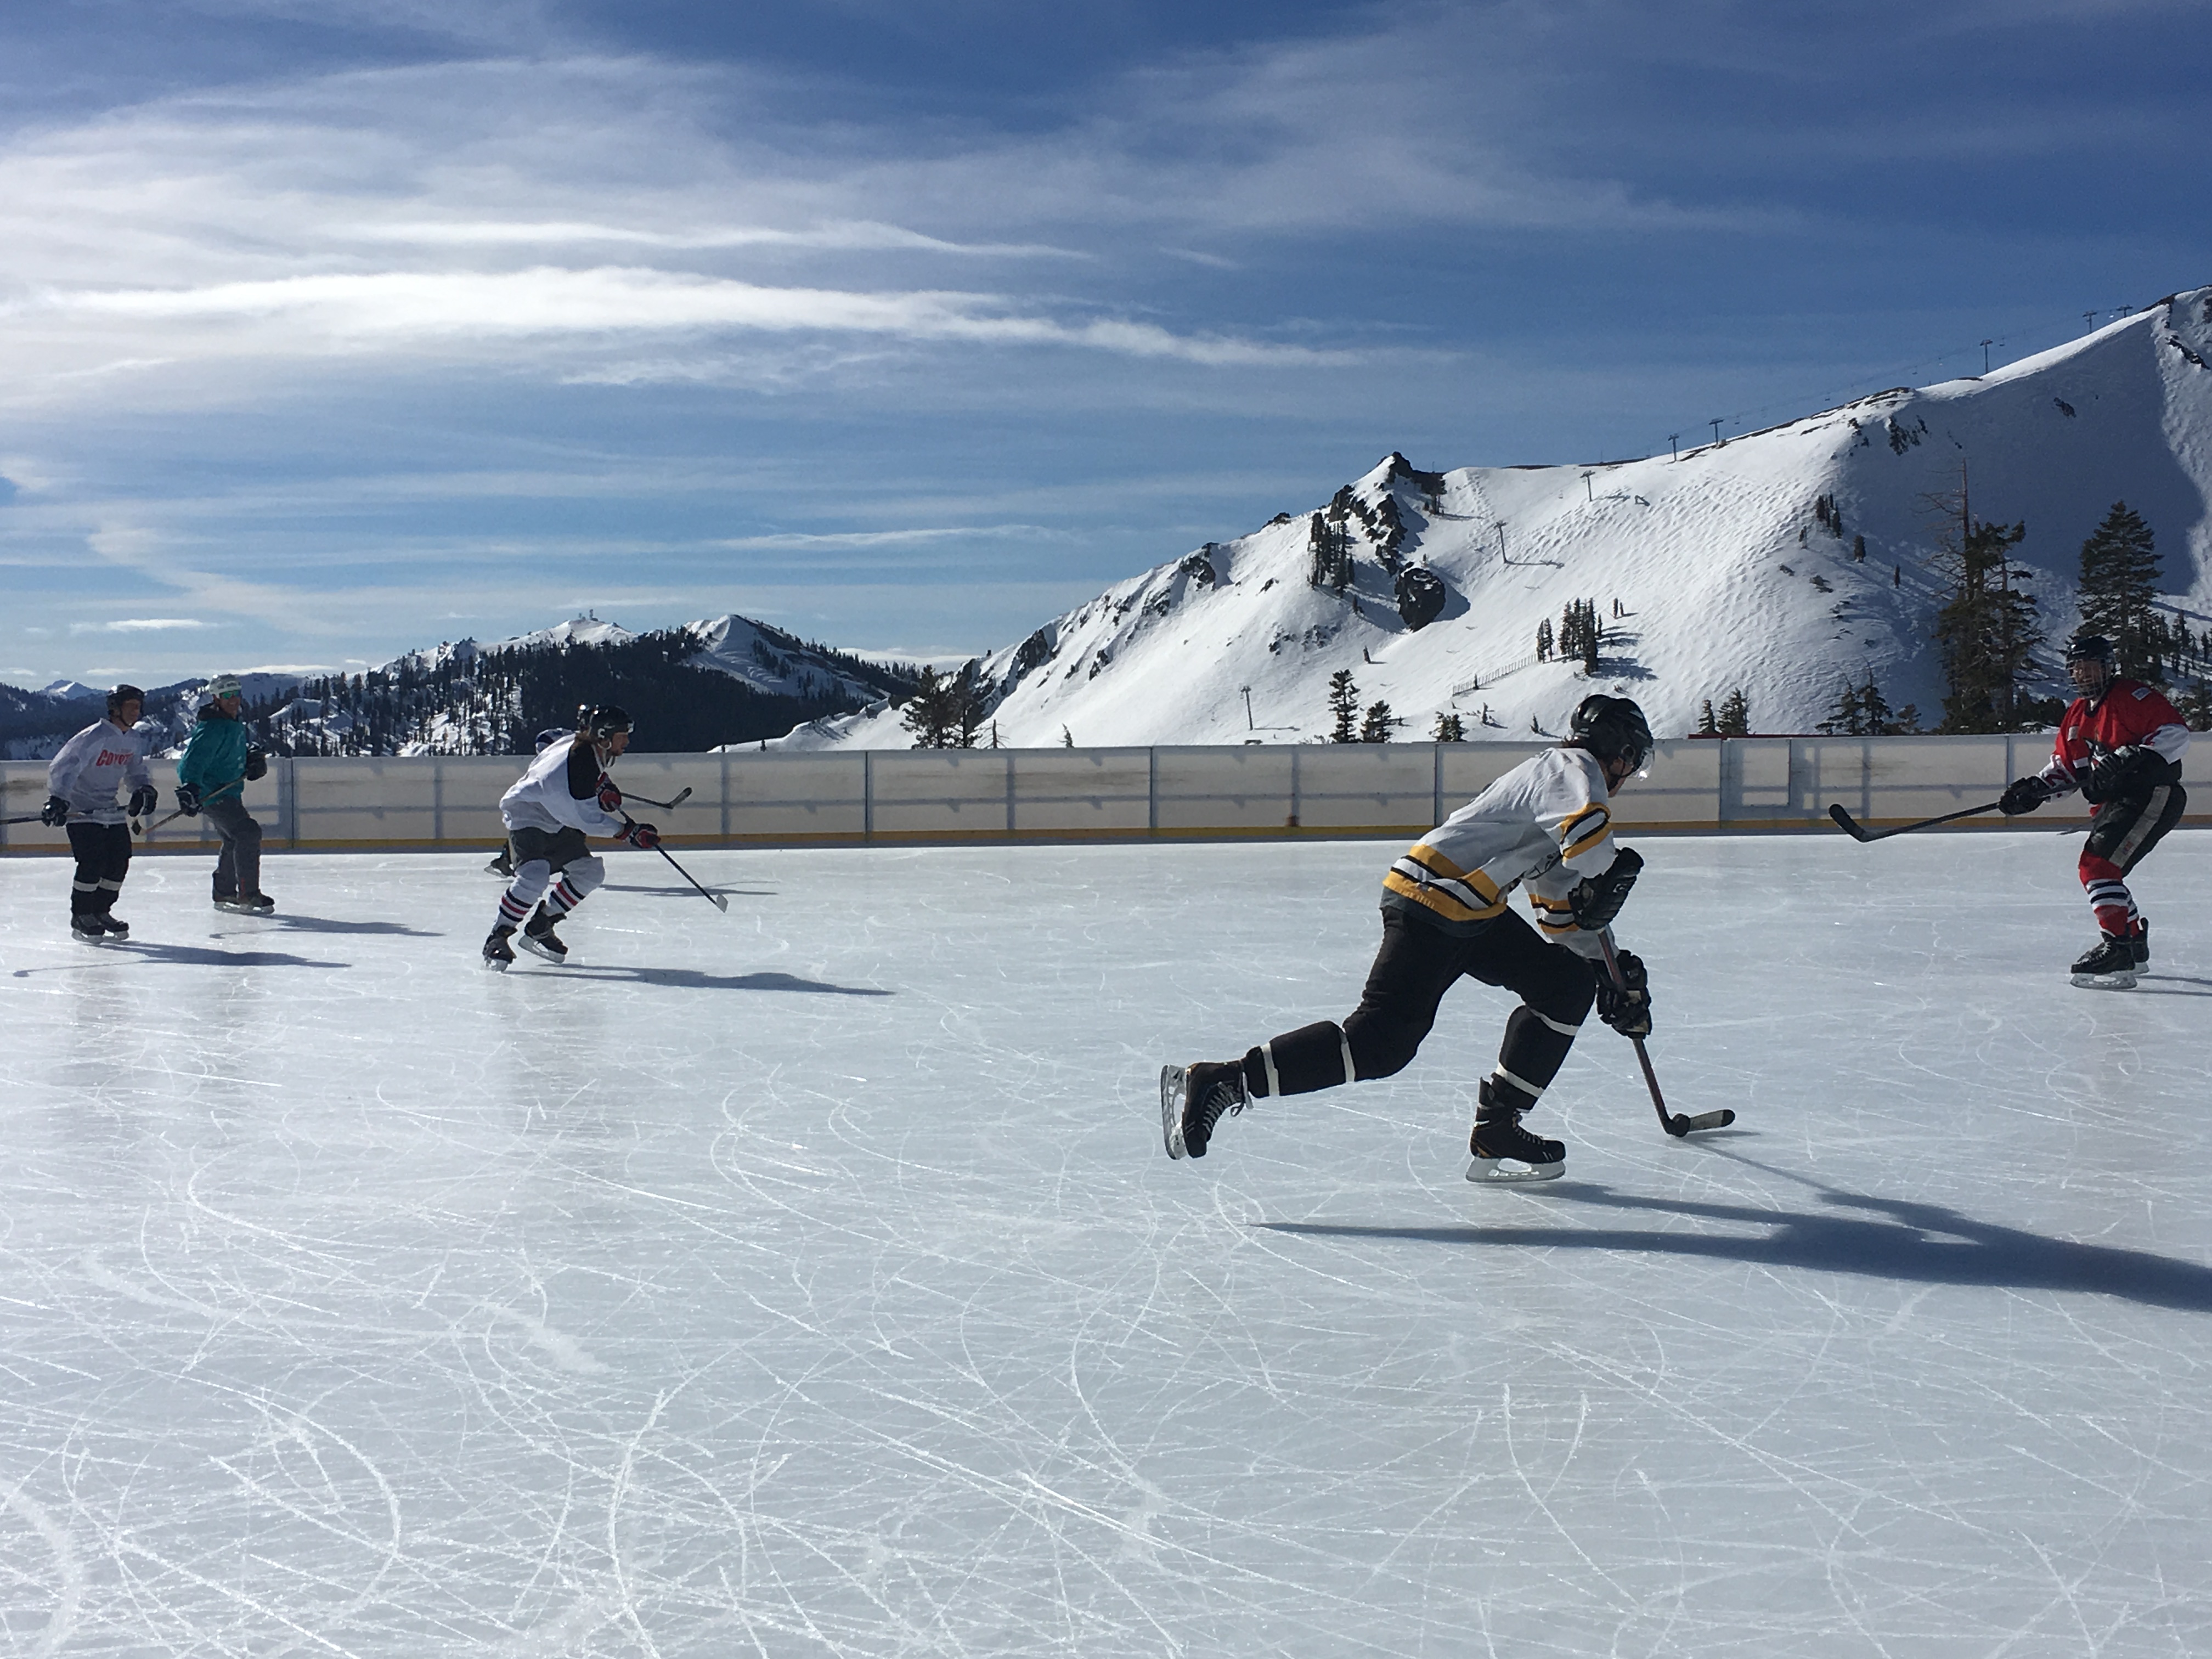 Ice hockey at Squaw this week.